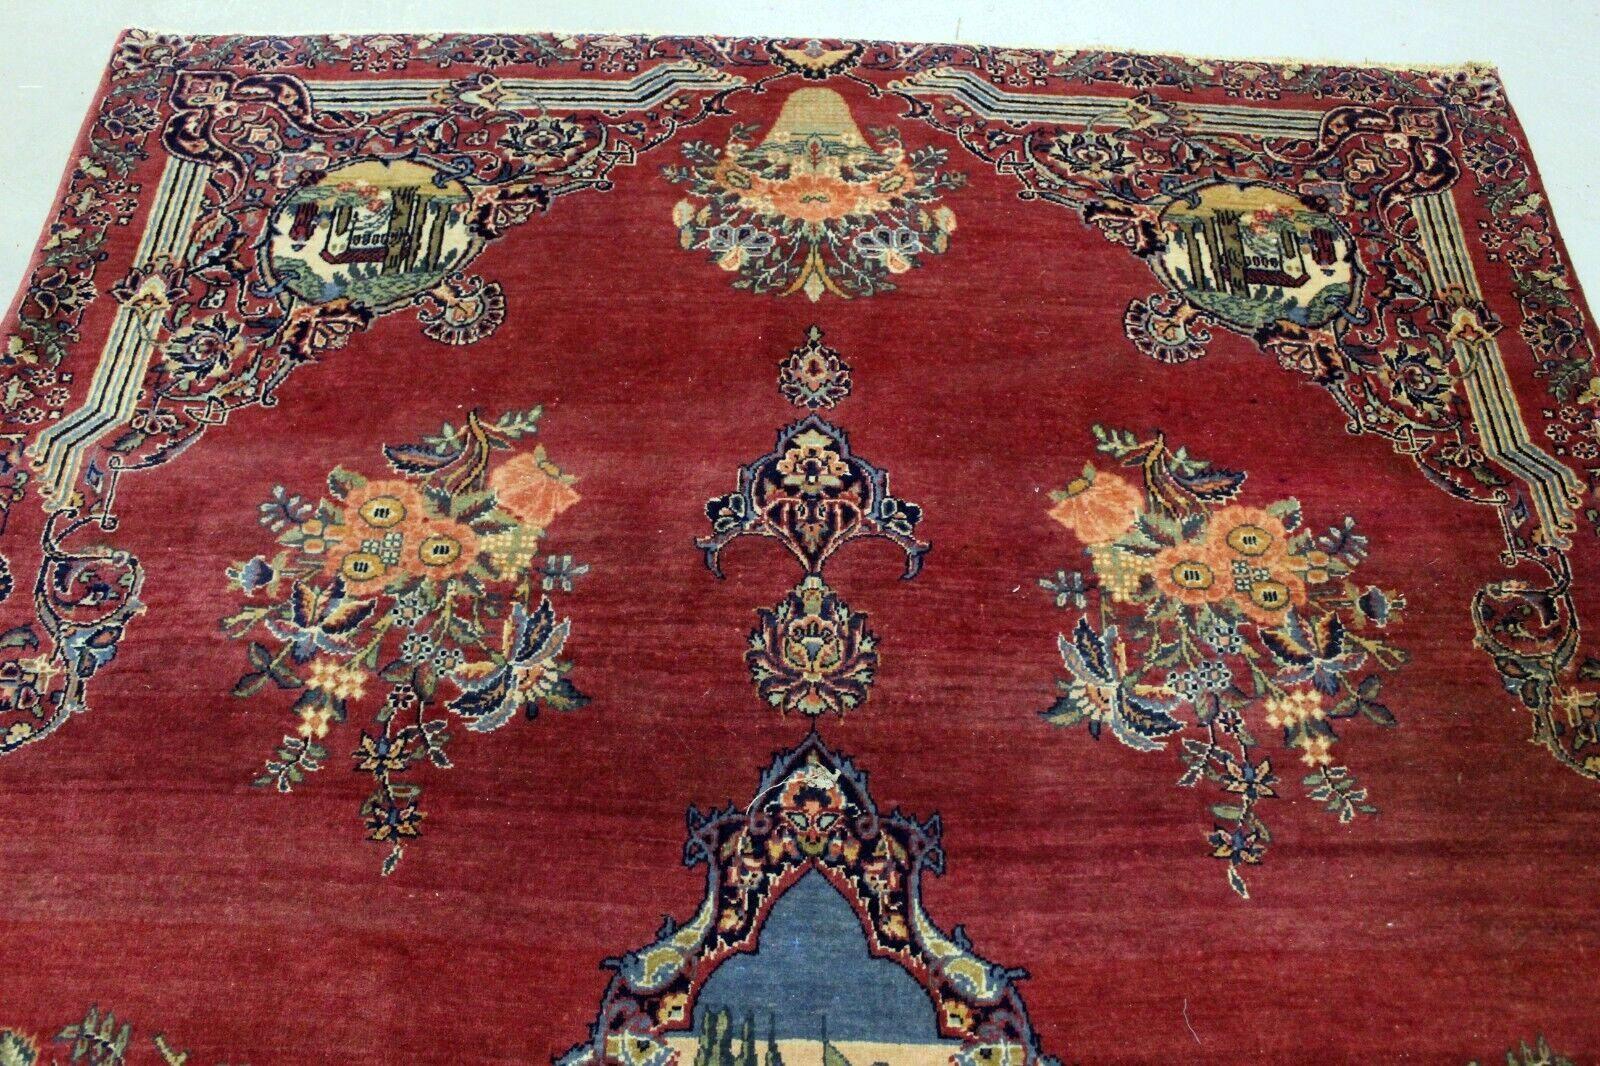  Introducing our exquisite Handmade Antique Persian Style Kerman Rug, a captivating piece that carries the rich heritage of Persian craftsmanship. Measuring approximately 4.3’ x 6.7’ (132cm x 205cm), this rug from the 1920s is meticulously crafted